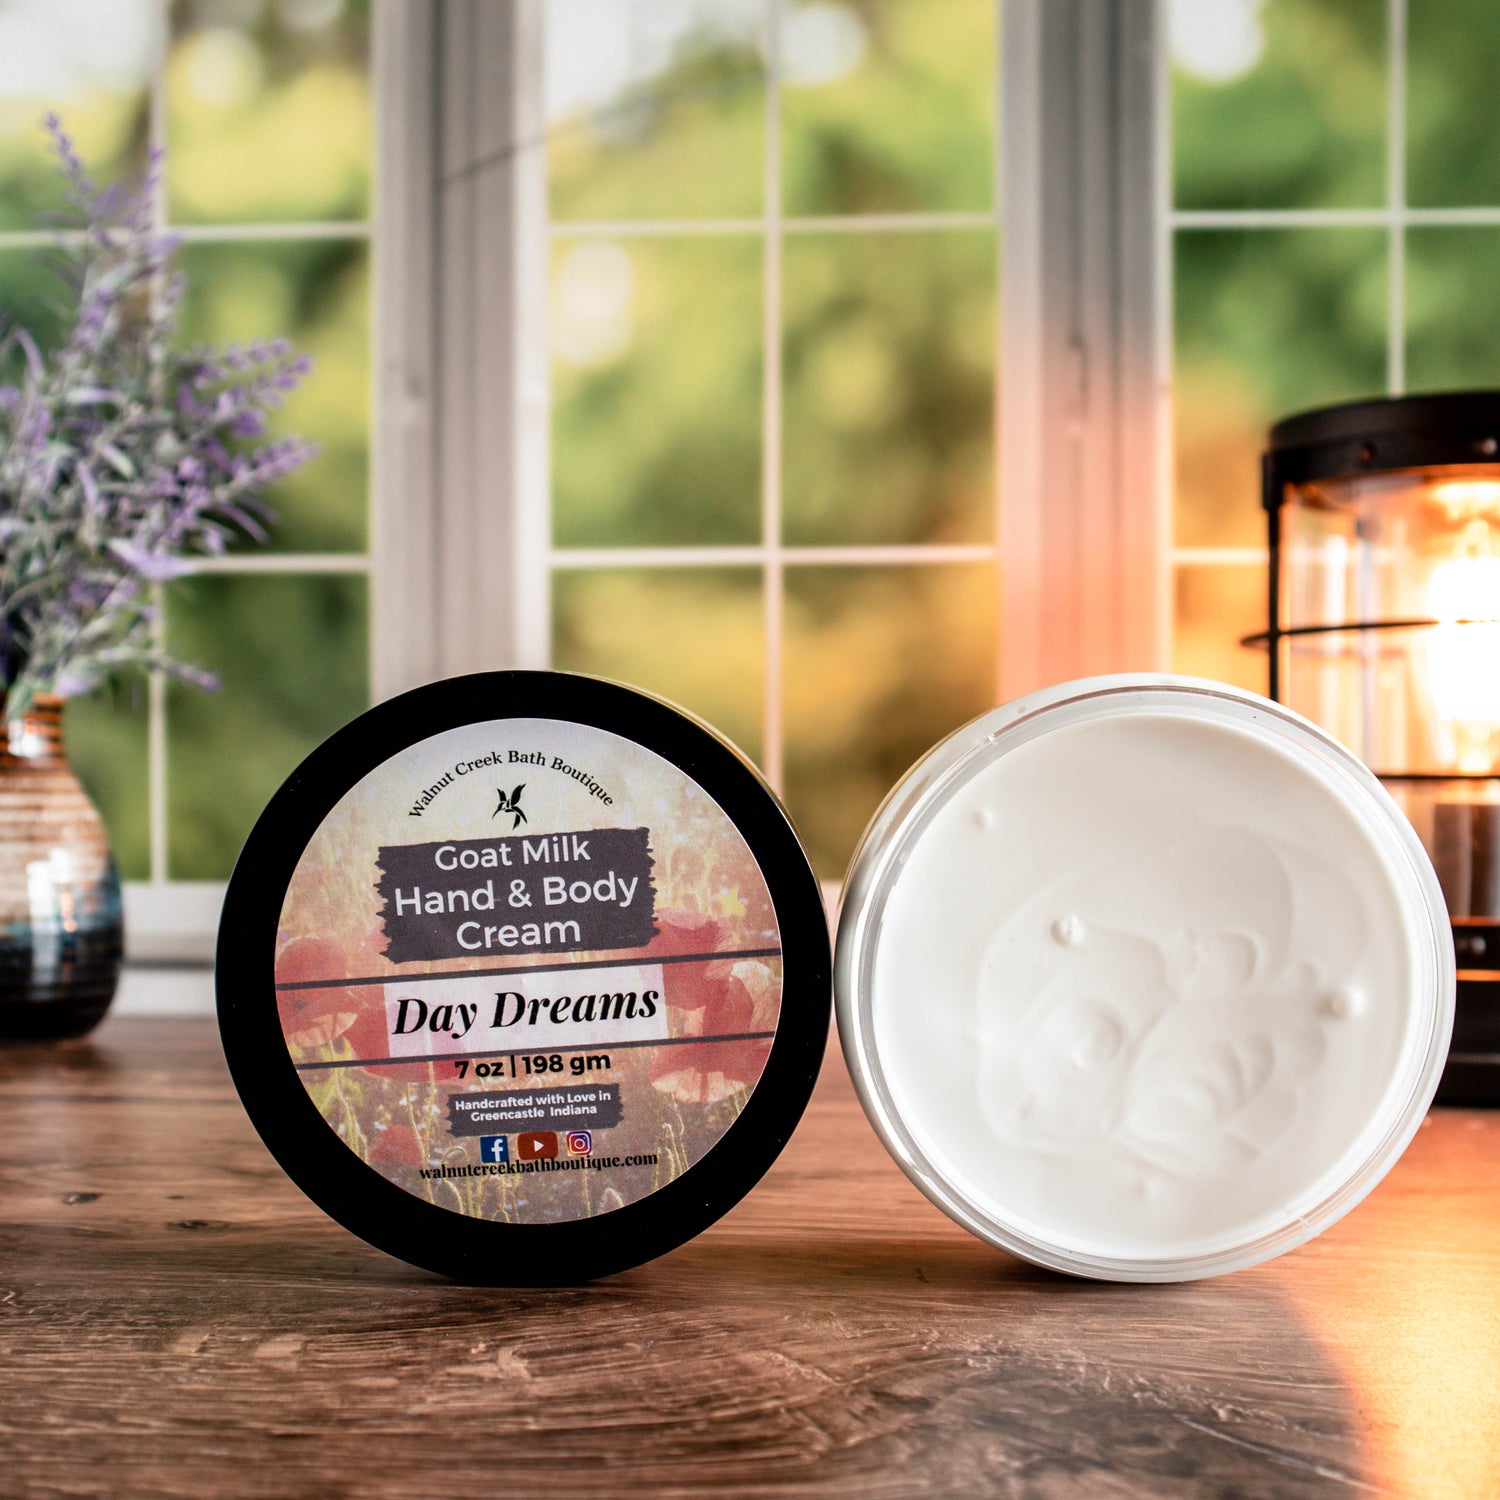 7 oz day dreams cream, one with top showing a pretty label of pink flowers, next to this is an open jar showing contents. There is a lush green background behind a window, a light in the back right and a pretty vase with flowers in the back left.